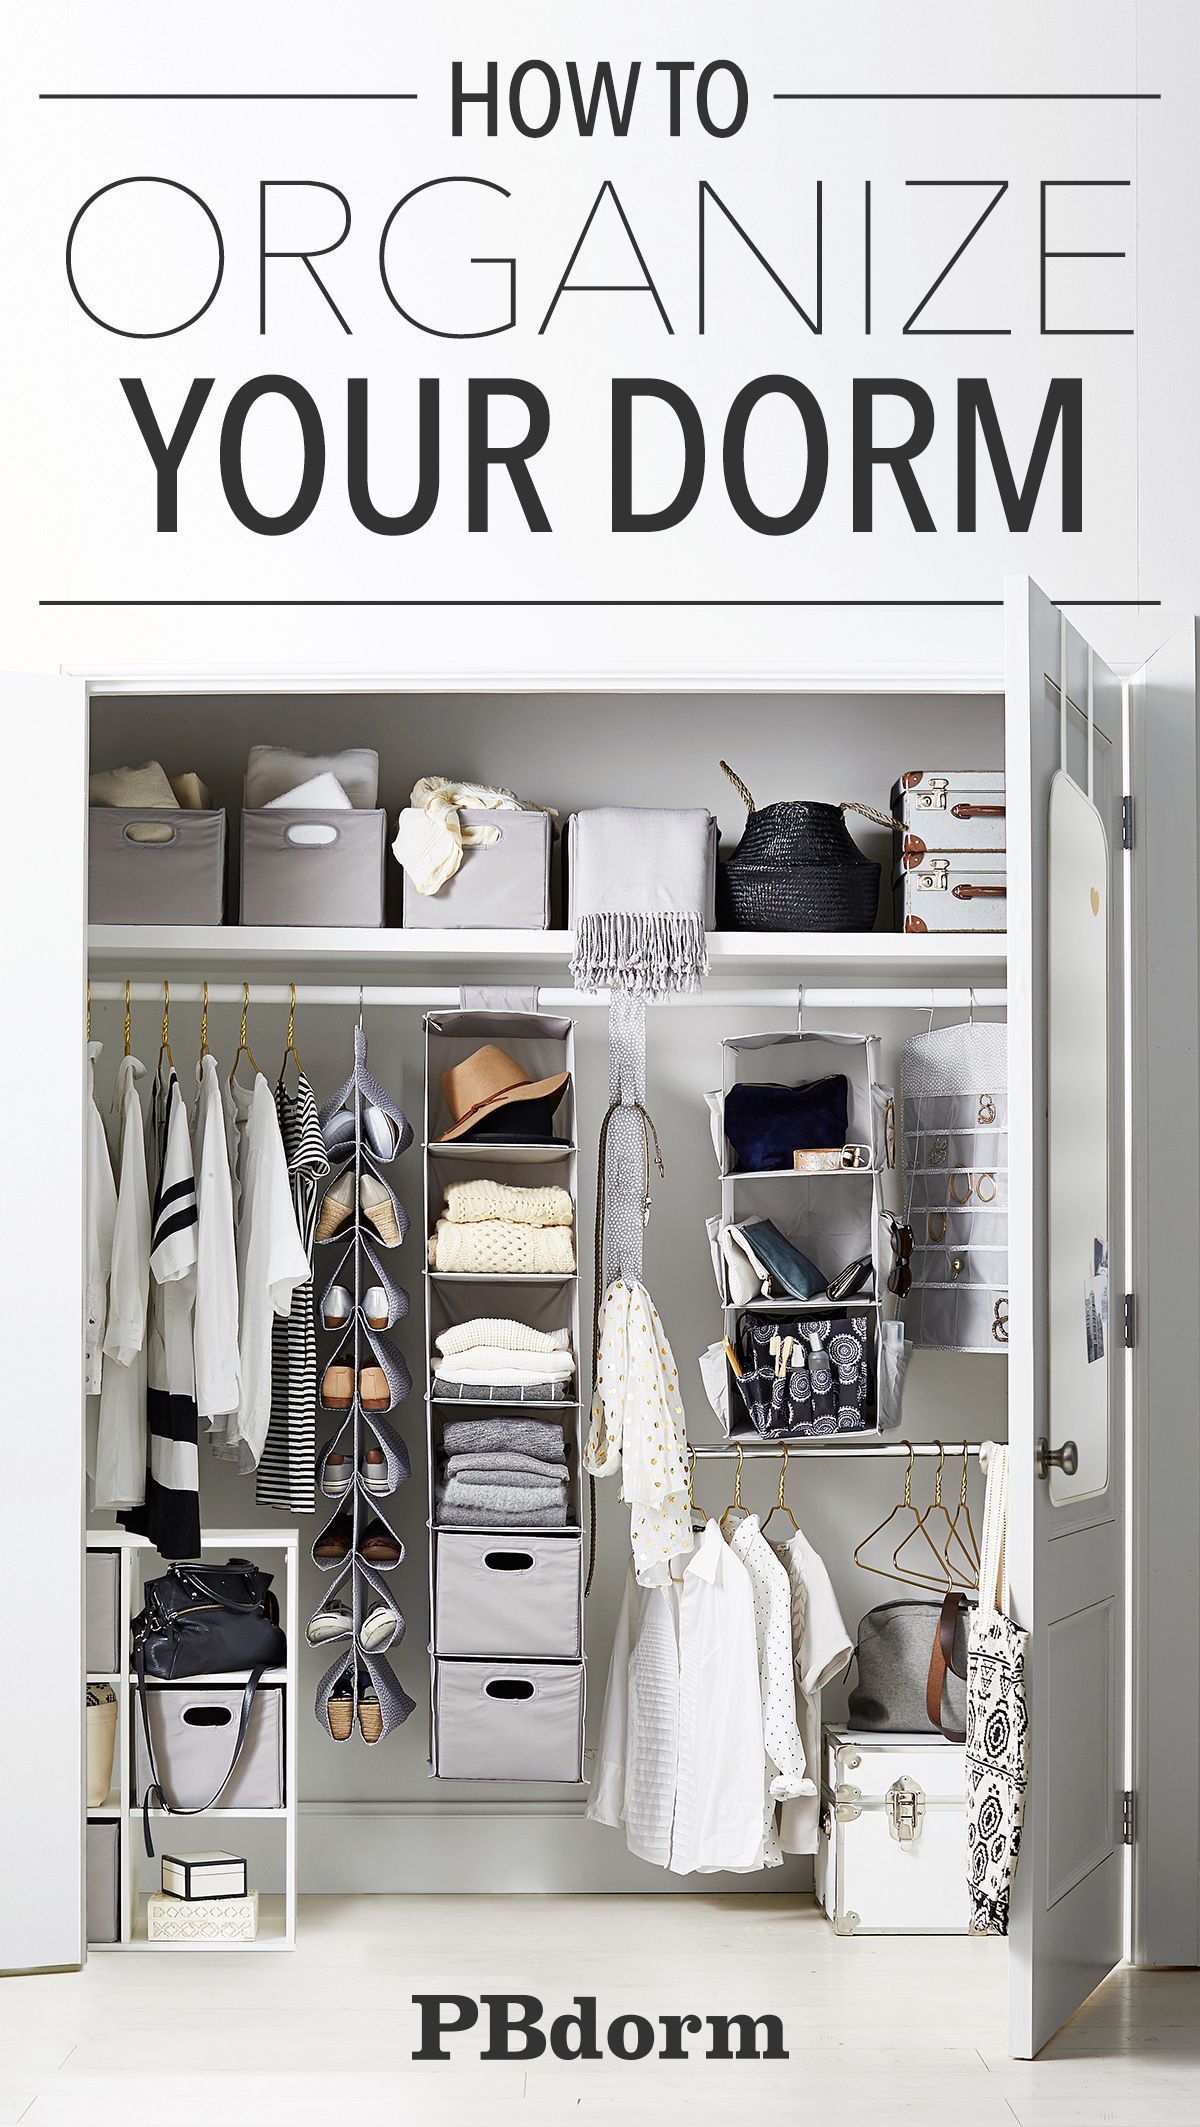 When you have to share a closet, maximizing space is key! Get storage bins and label them with your names so you know whose things